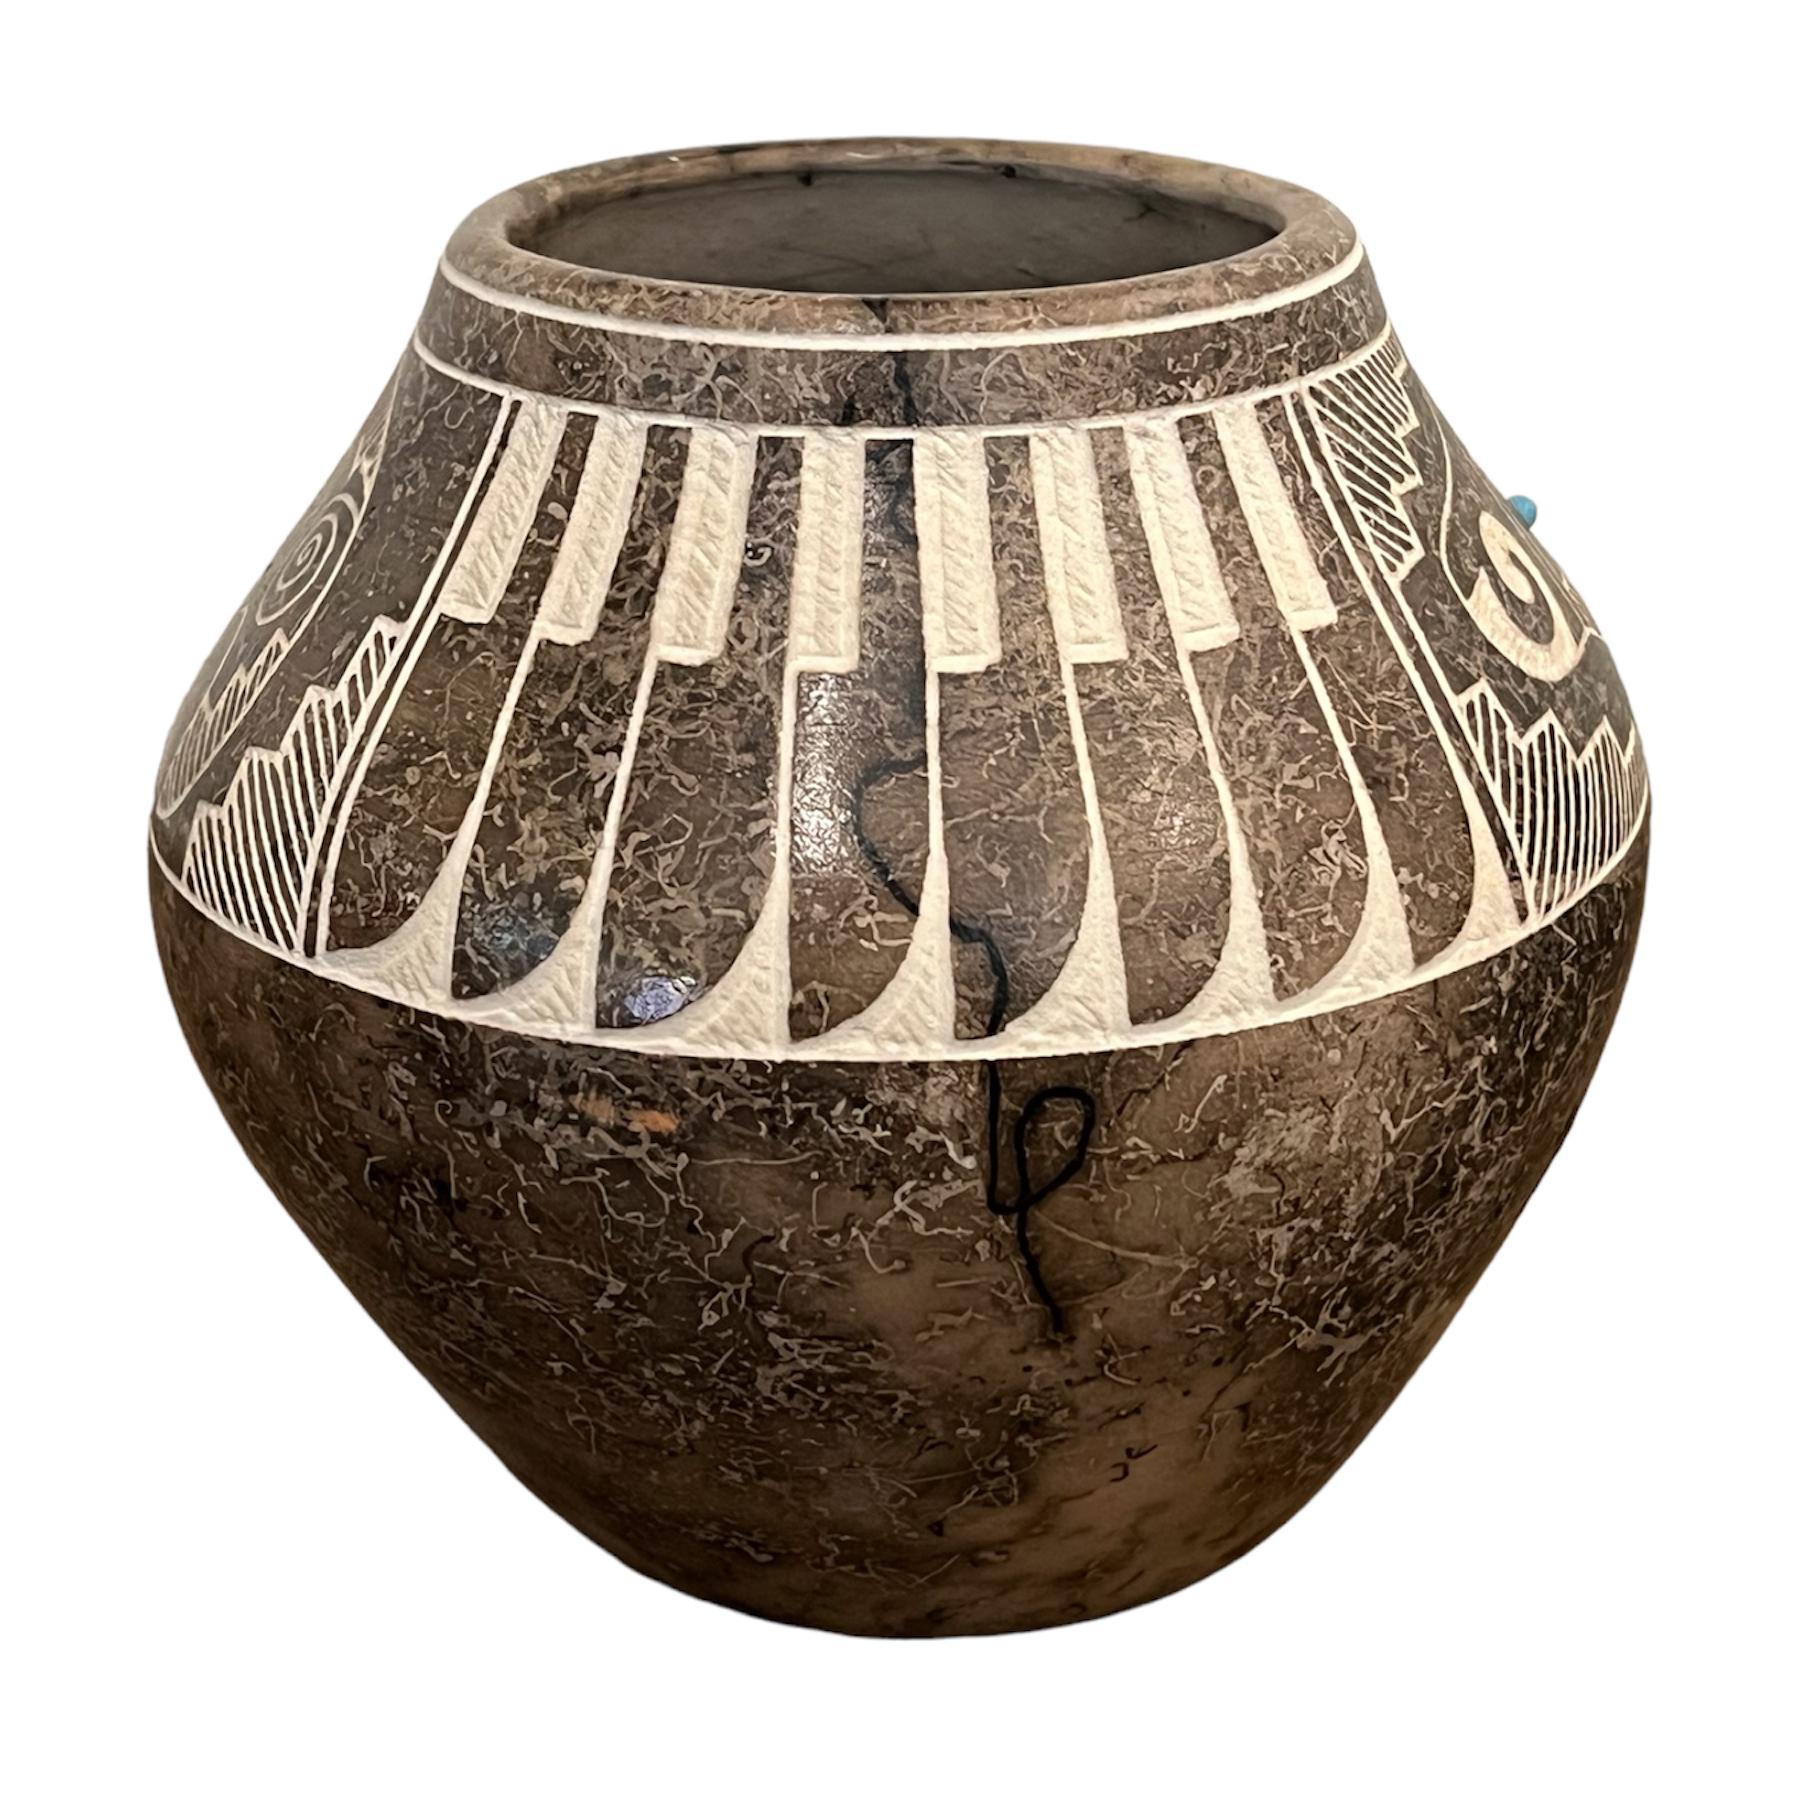 Gary Louis and his wife, Corrine, are Acoma potters. Corrine is a third generation potter from the Marie Z. Chino family. Corrine and Gary are carrying on the family tradition of working with pottery. They first came across the idea of using human